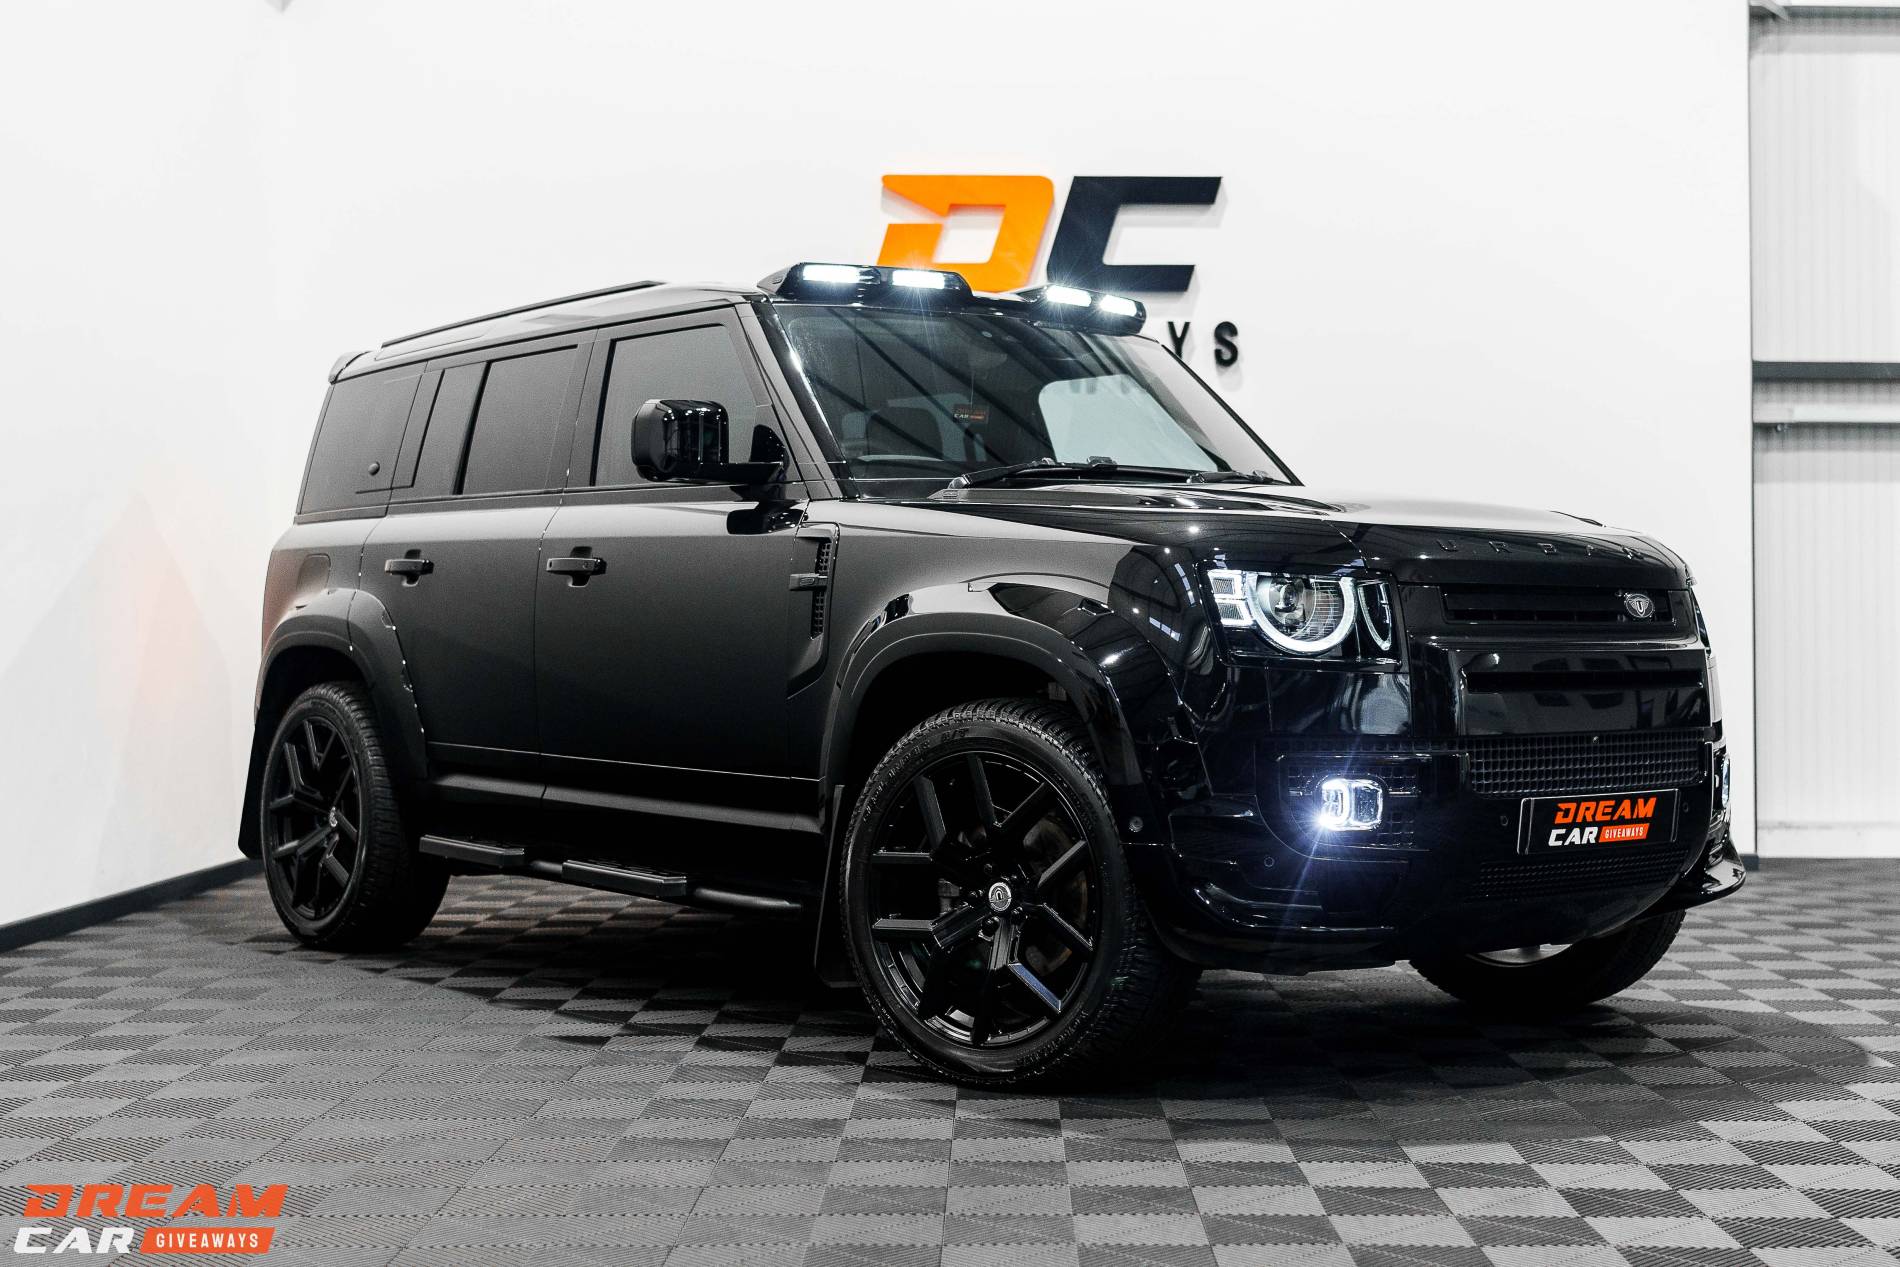 Win this GT4 RS Weissach & Urban Defender 110 & £5,000 or £170,000 Tax Free